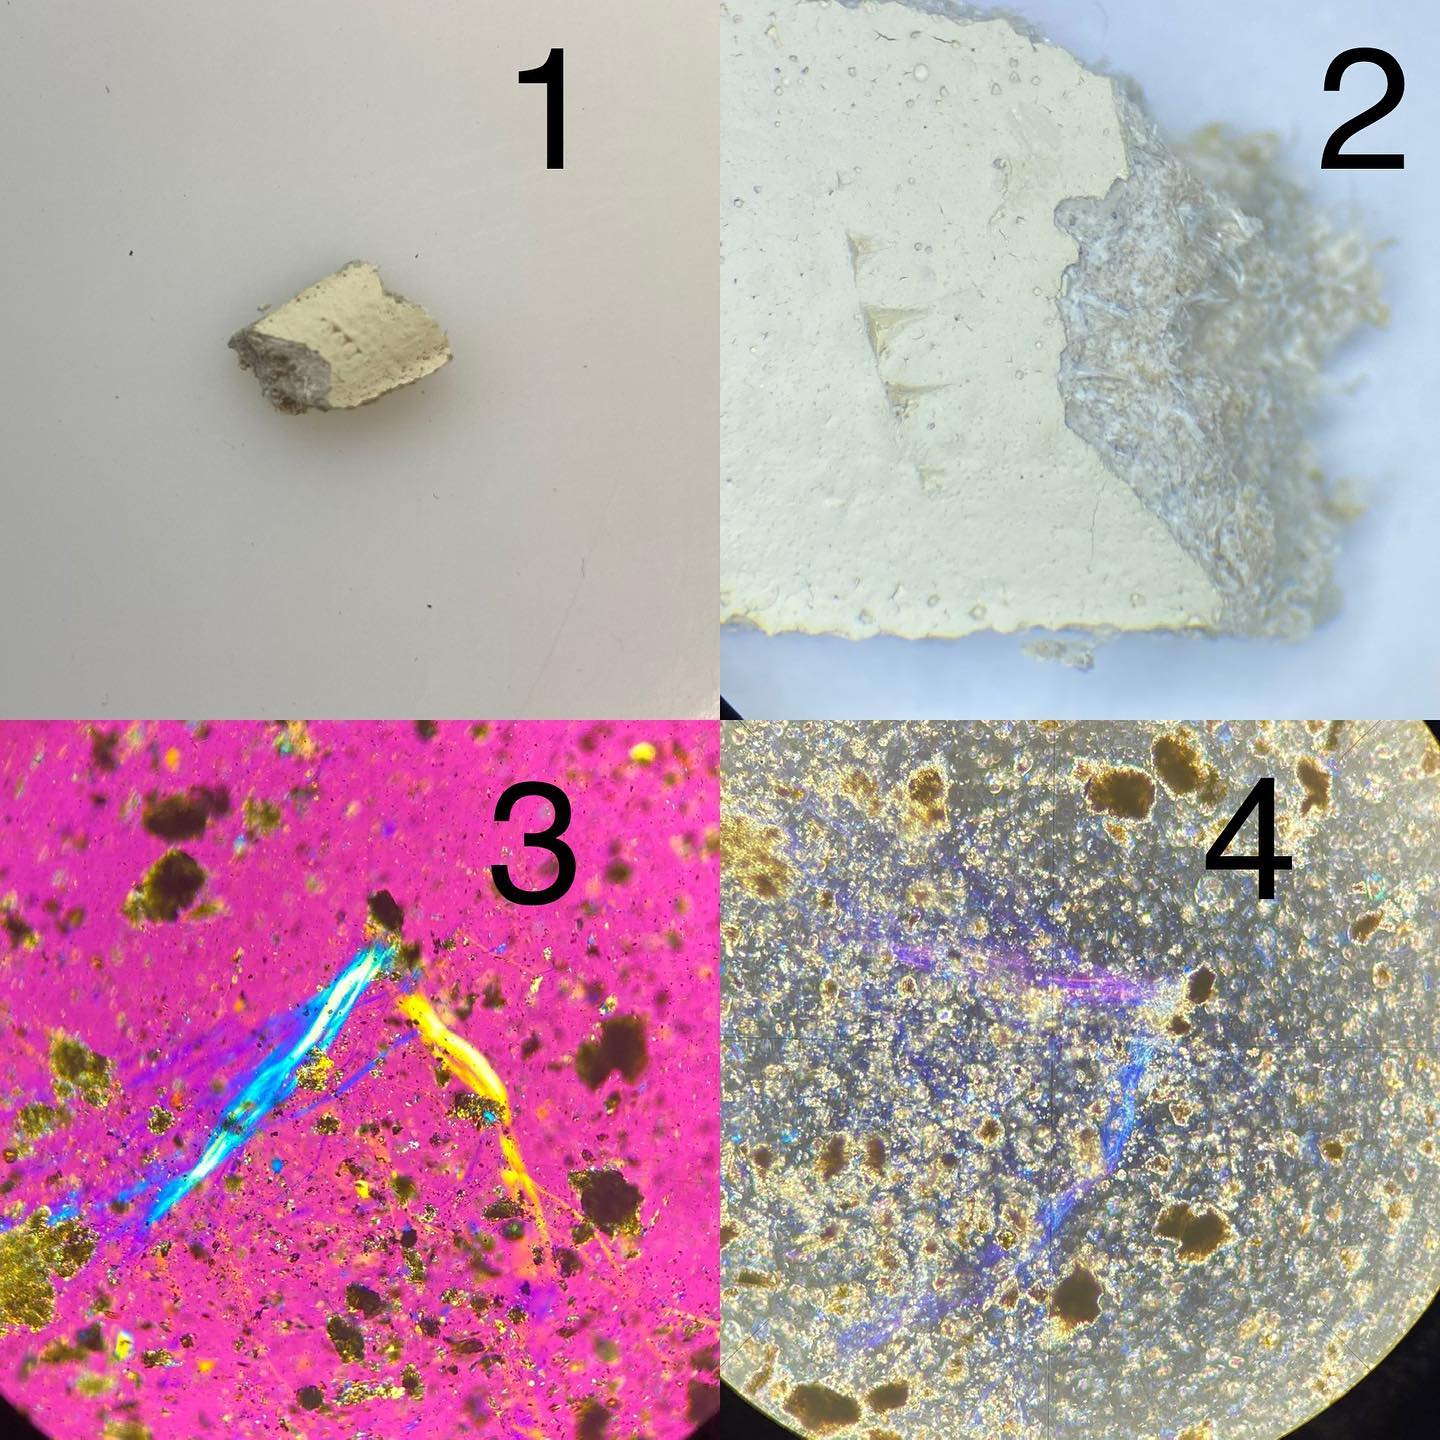 Steps to confirm asbestos (Chrysotile)
1. Look at submitted material (4” Pipe) 2. Inspect further under a stereoscope (notice suspicious fibers) 3. Prep onto a slide with 1.550 RI Oil, look at fiber morphology and other characteristics. 4. Confirm it’s Chrysotile by checking RI colors (magenta/blue) #asbestos #asbestosremoval #mold #bacteria #ecologicslab #environmentallab #environmentallaboratory #environmentaltesting #microscopy #plm #pcm #micro #chrysotile #chrysotileasbestos